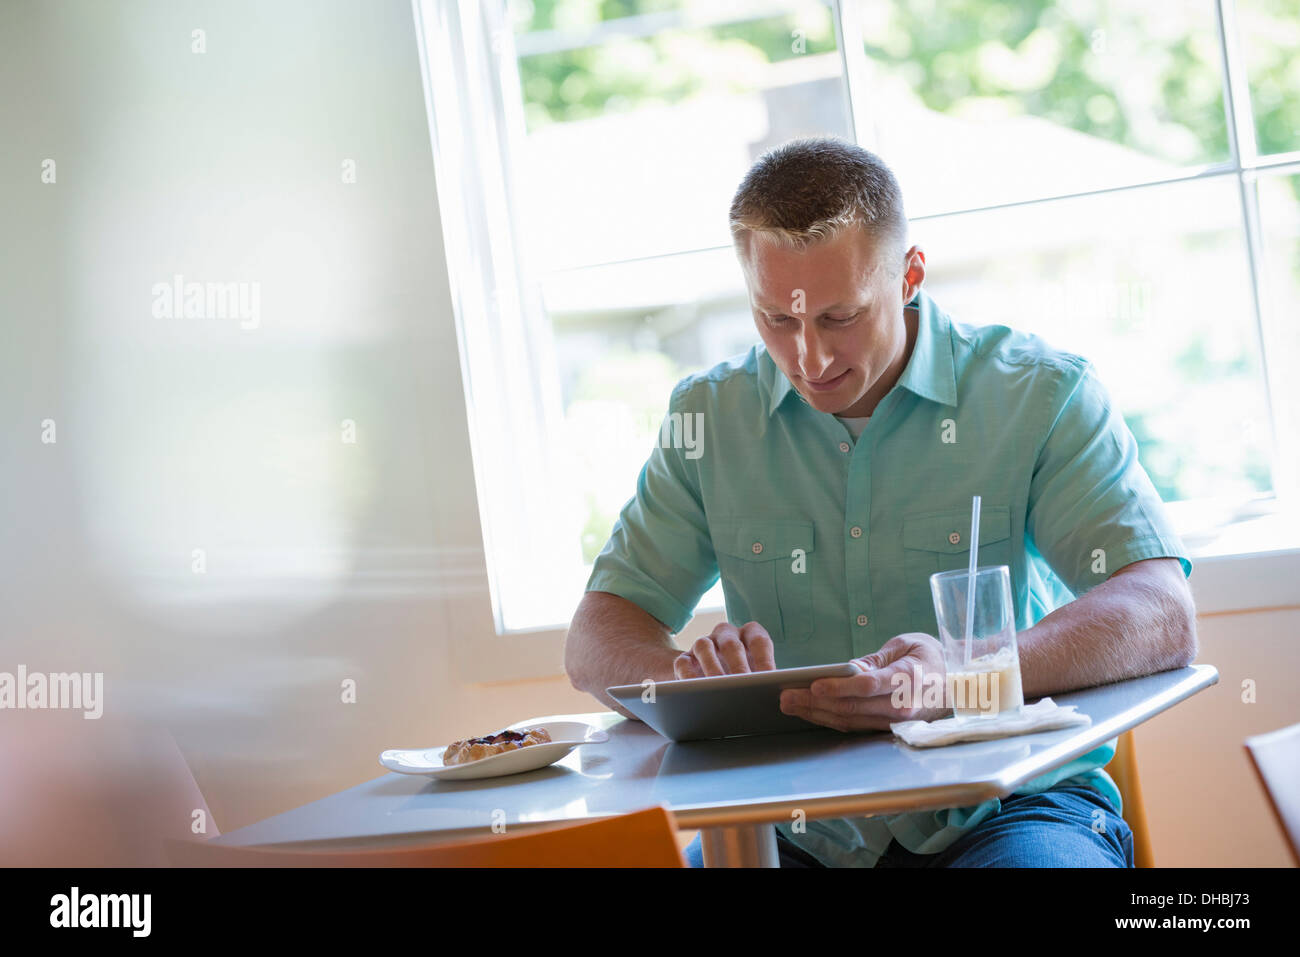 A man with short cropped hair sitting at a cafe table. Using a digital tablet. Stock Photo